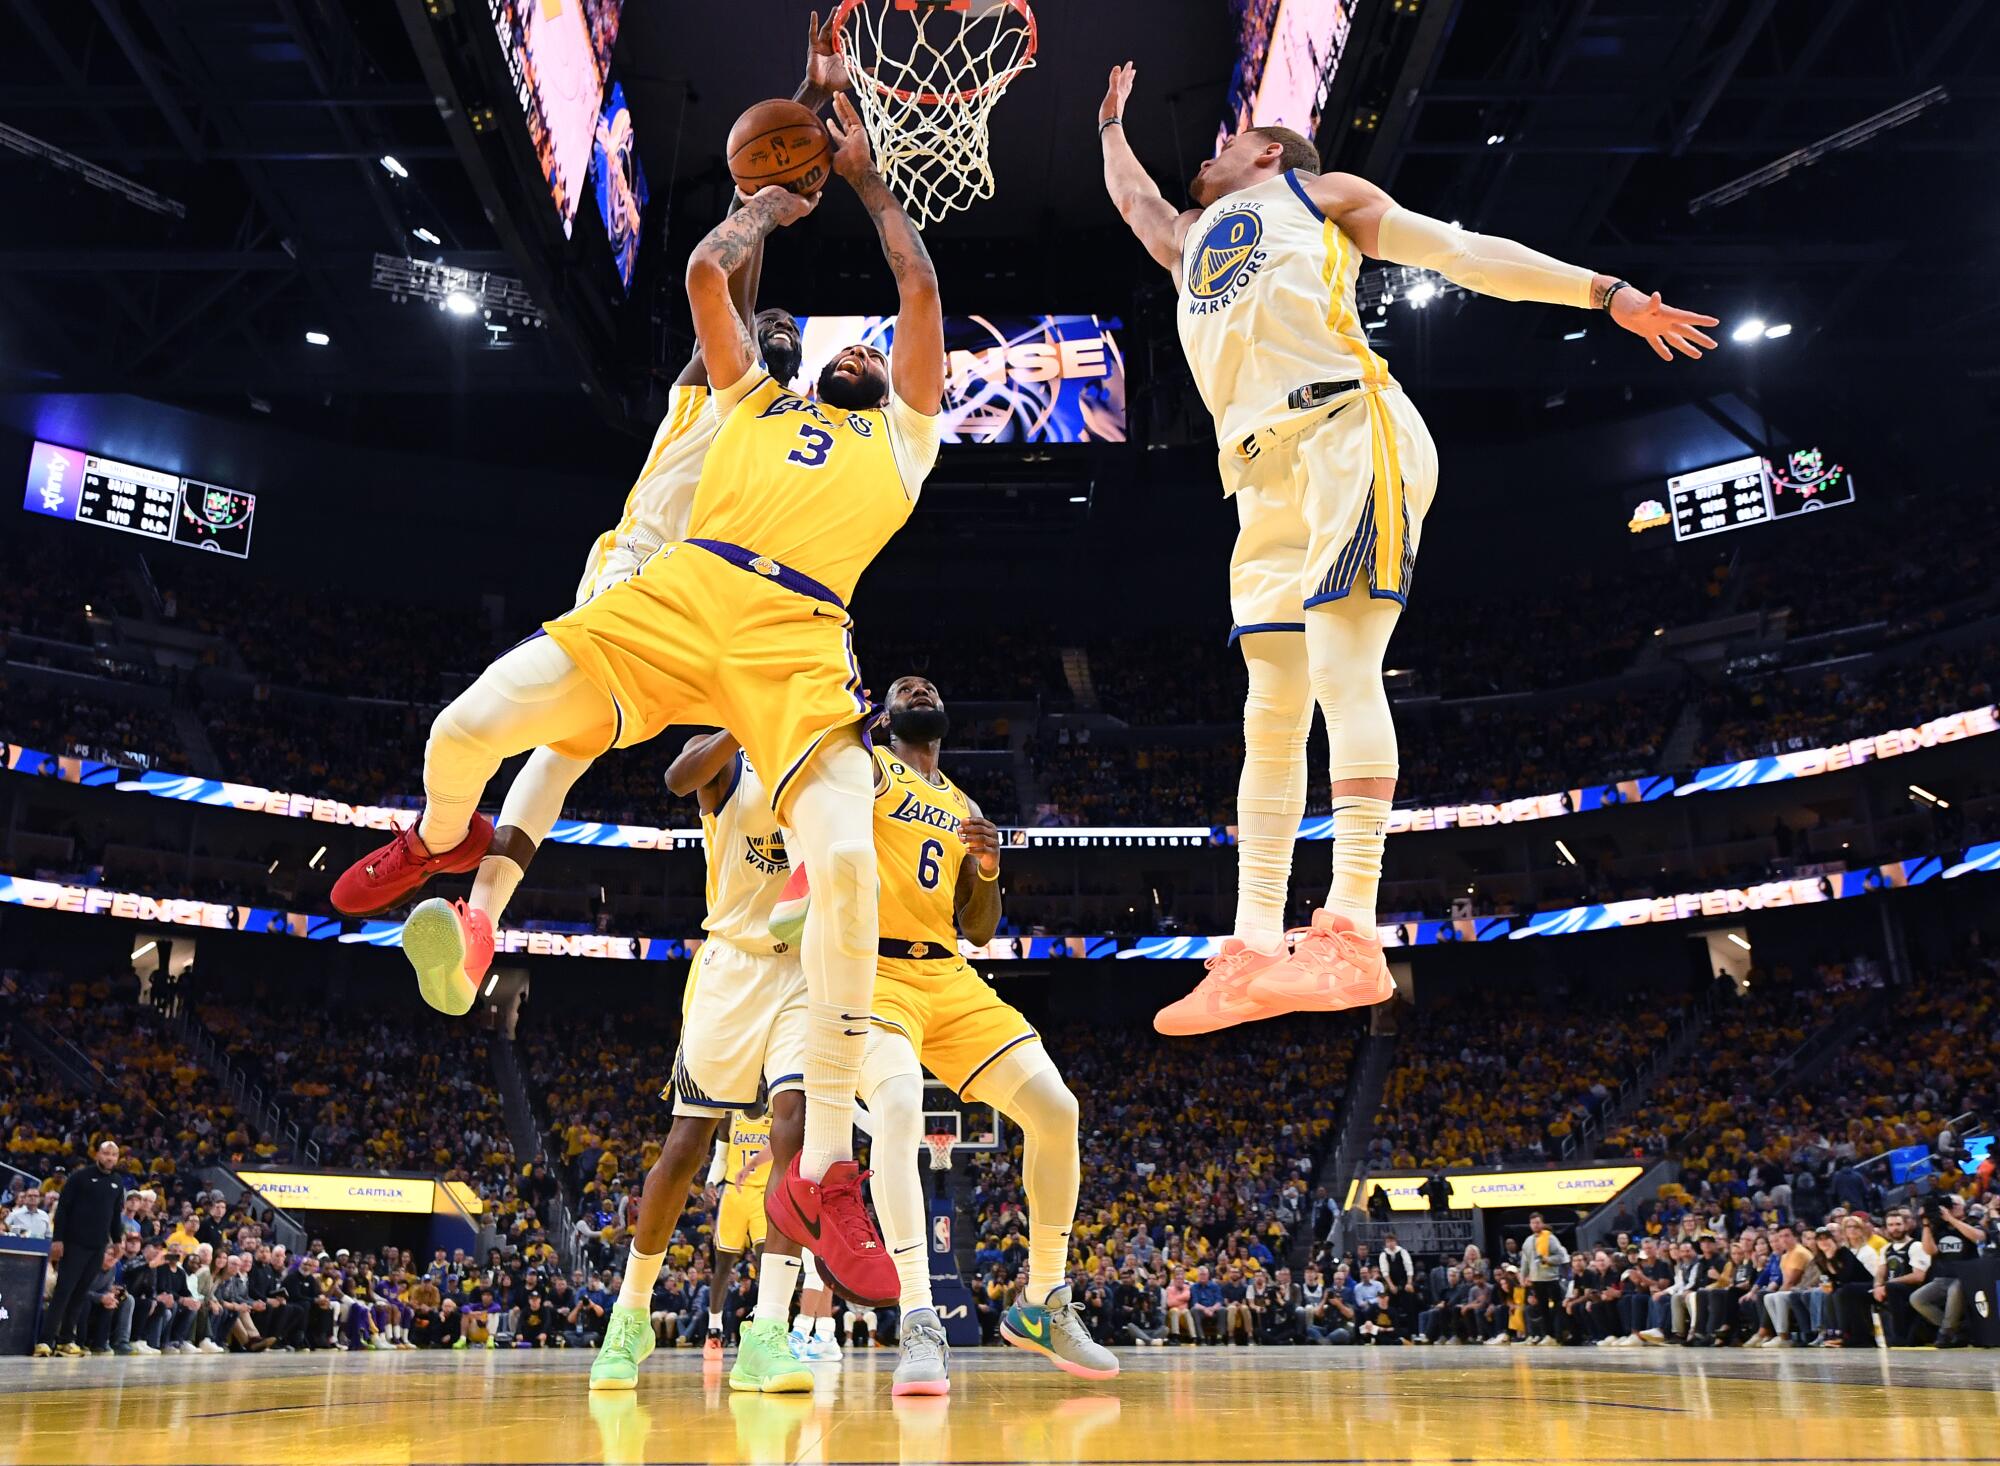 Lakers forward Anthony Davis has his shot blocked by Warriors forward Draymond Green as Donte Di'Vincenzo helps on defense.